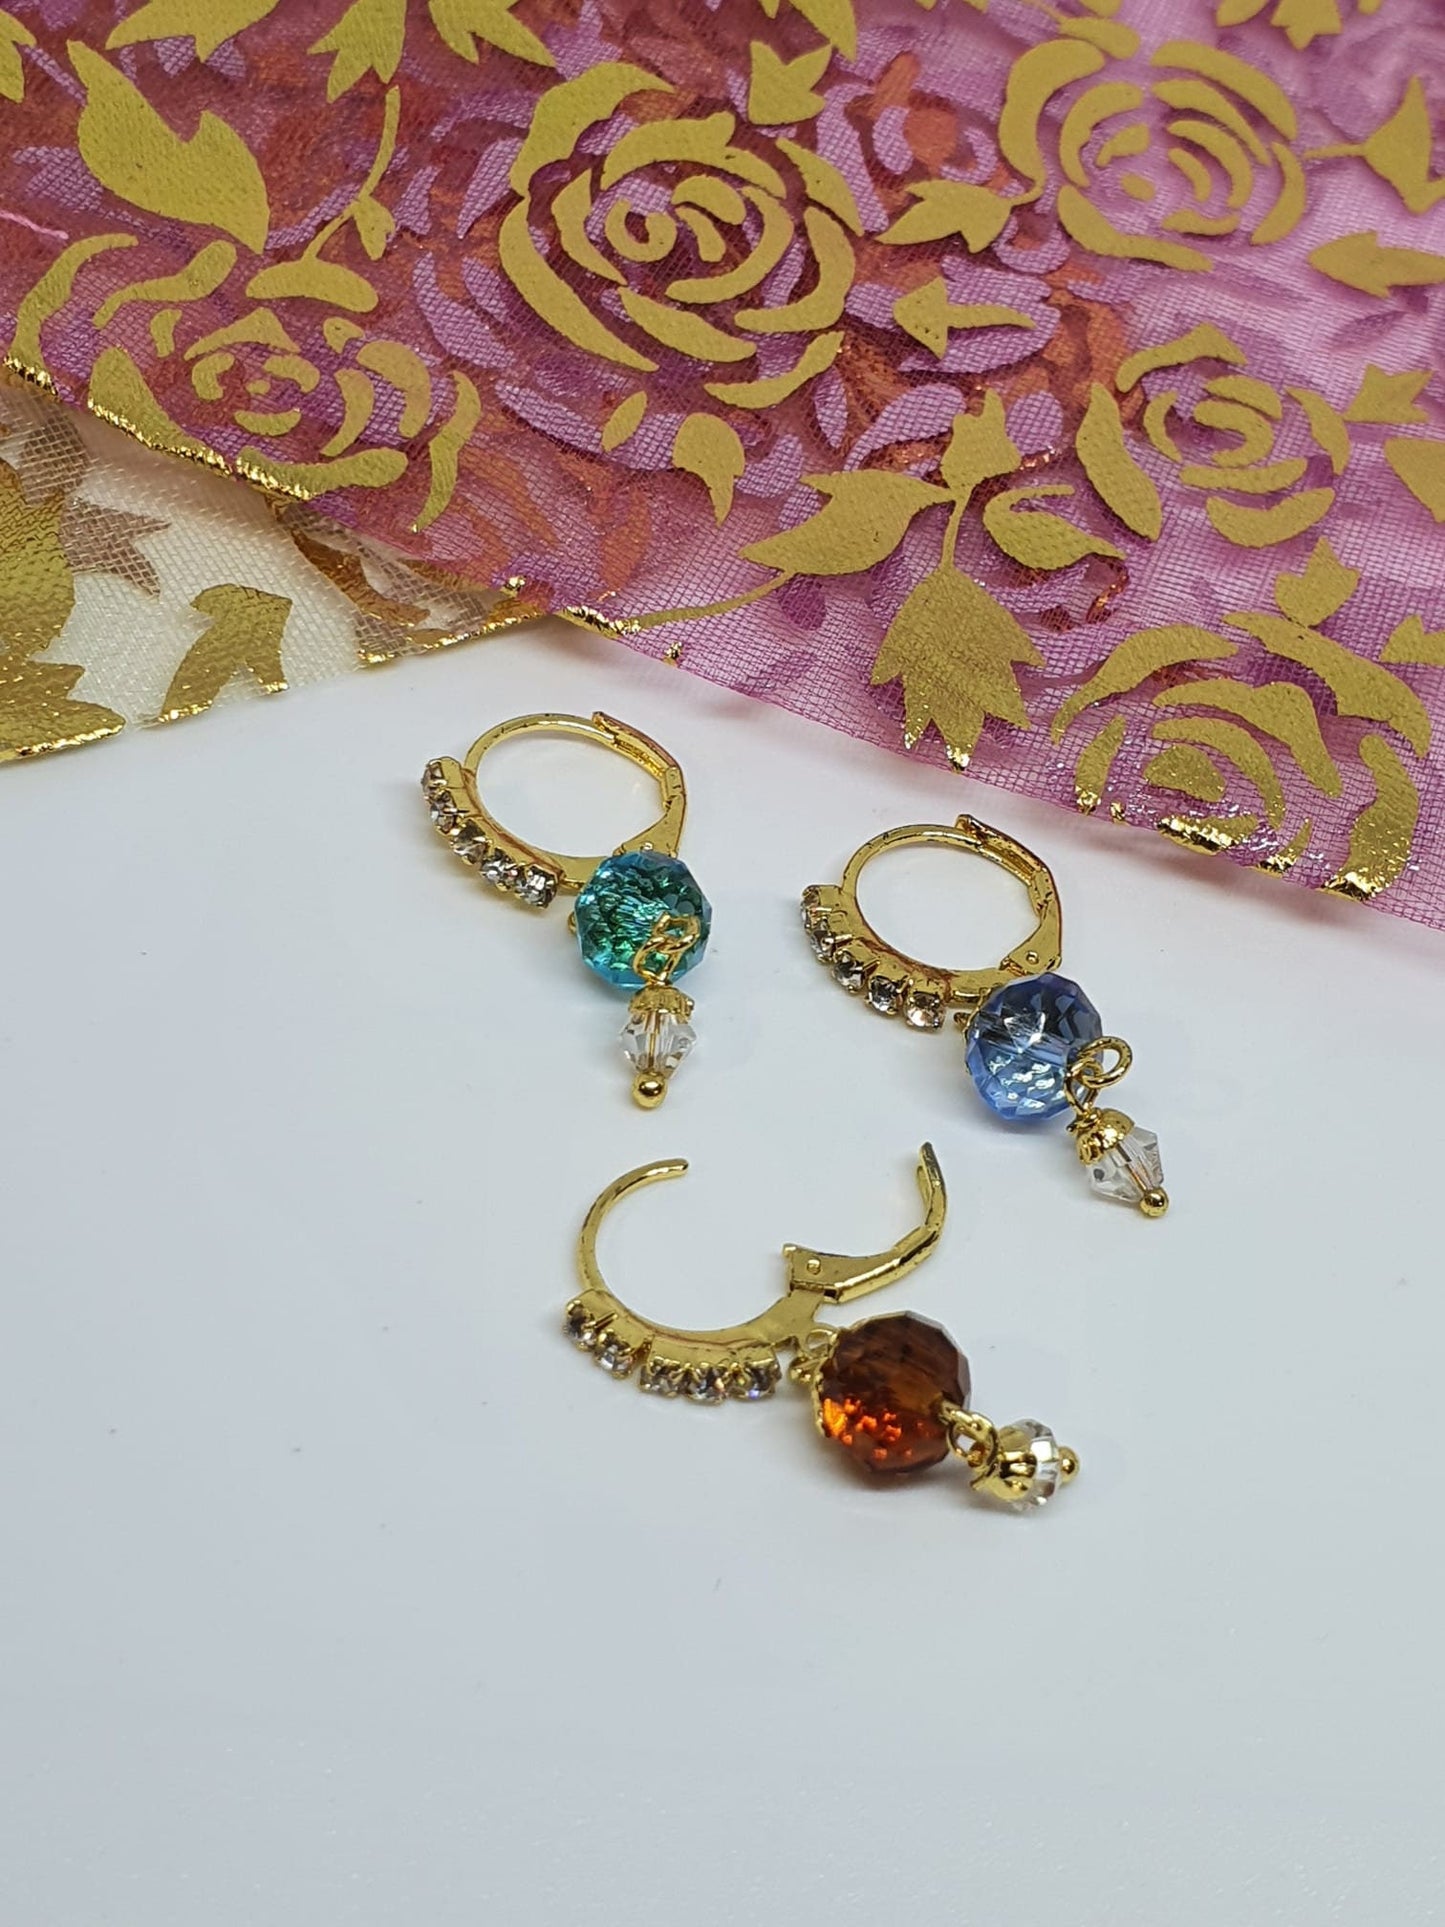 3 pieces Hoop Stone Nose Ring Gold Silver Tone Bollywood Wedding Indian Jewelry Women Pierced Nose